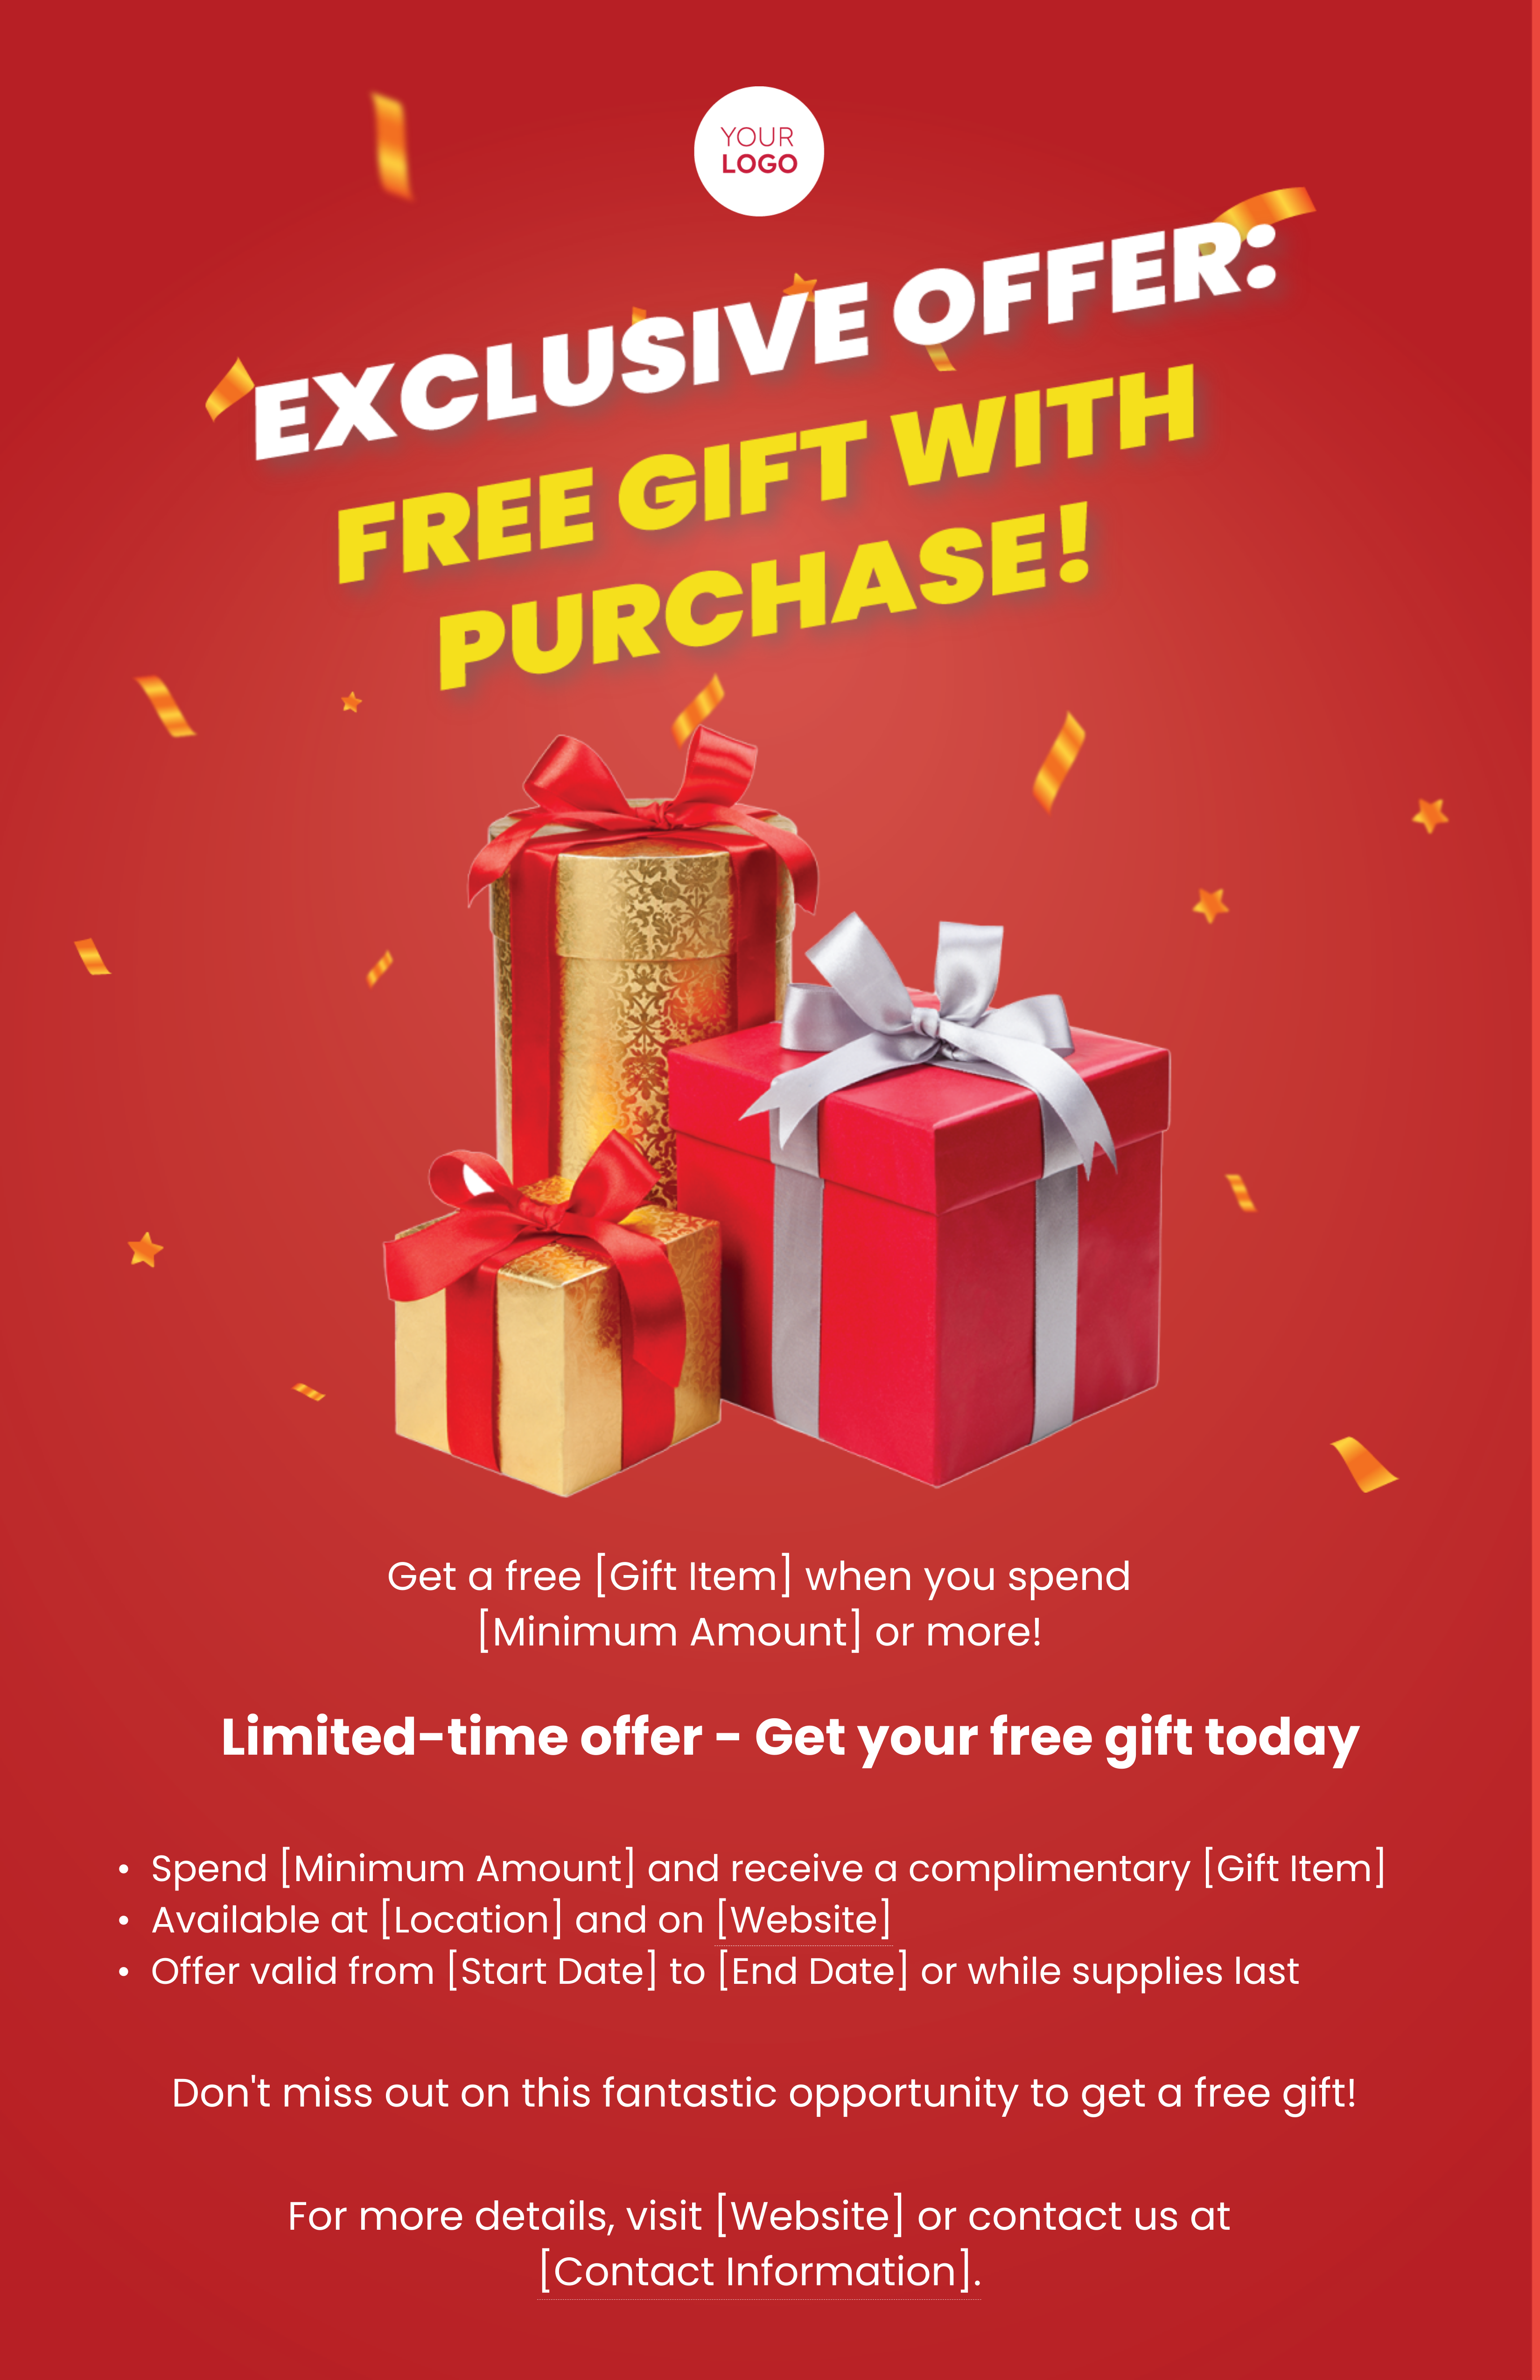 Why didn't I get a free gift? : r/Ipsy